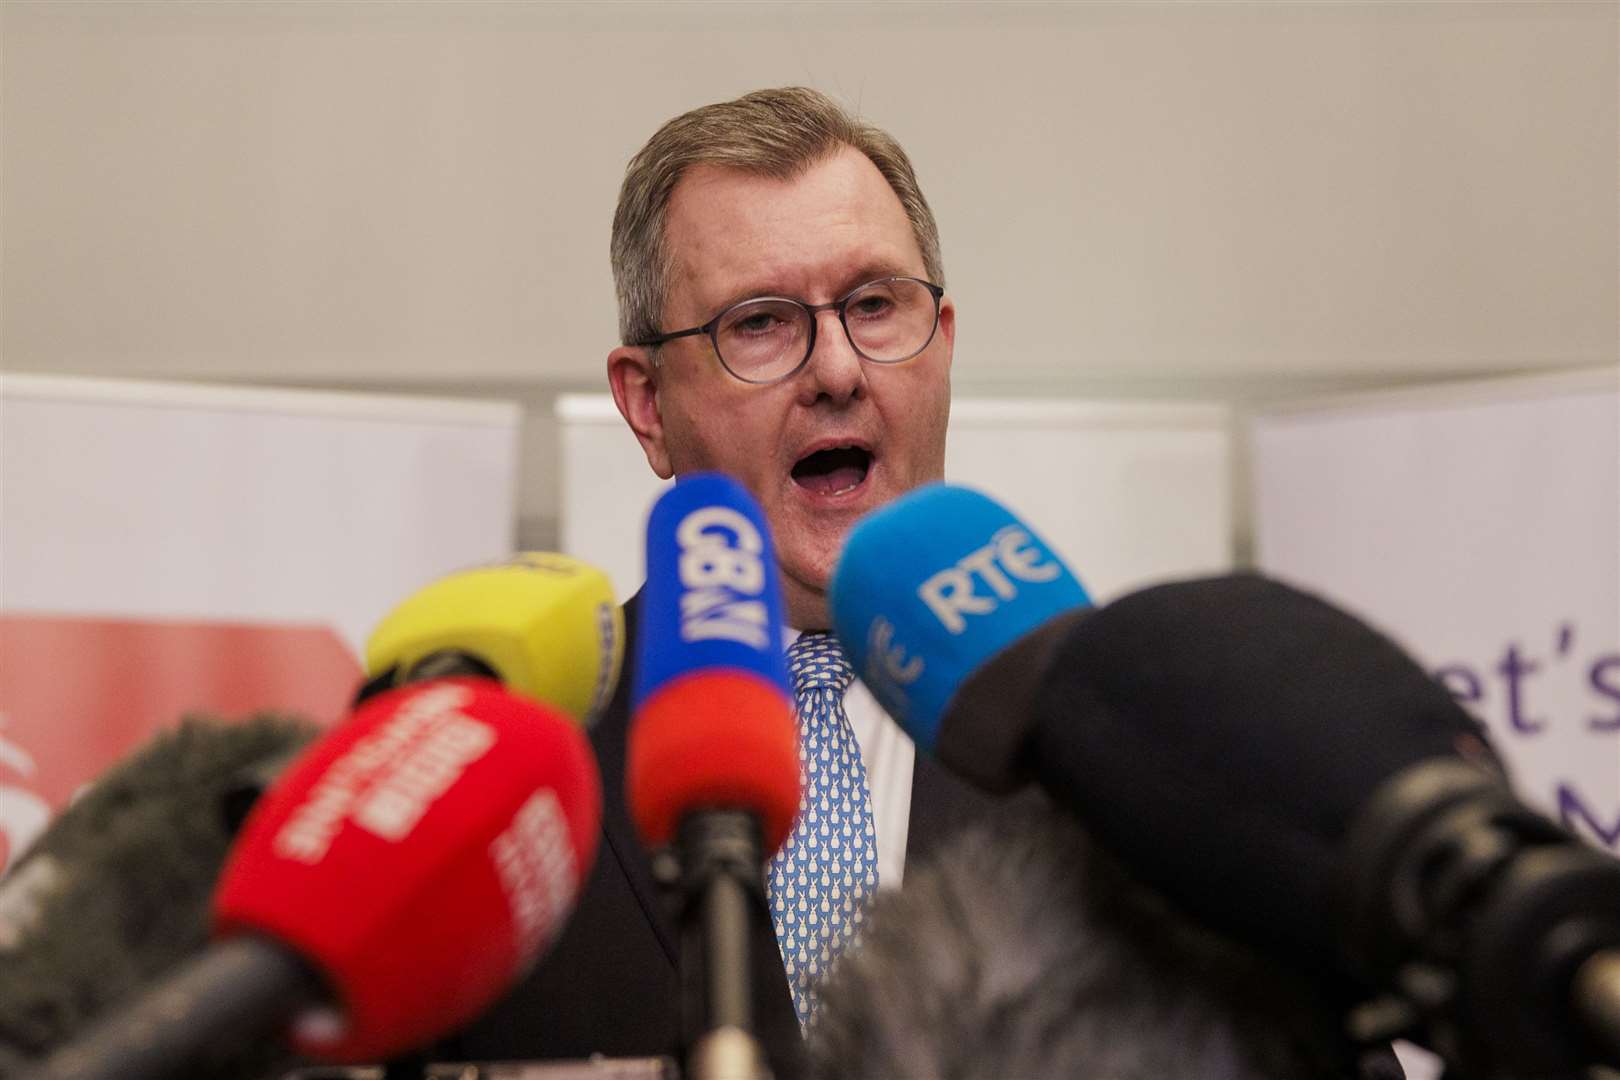 DUP leader Sir Jeffery Donaldson MP during the press conference (Liam McBurney/PA Wire)